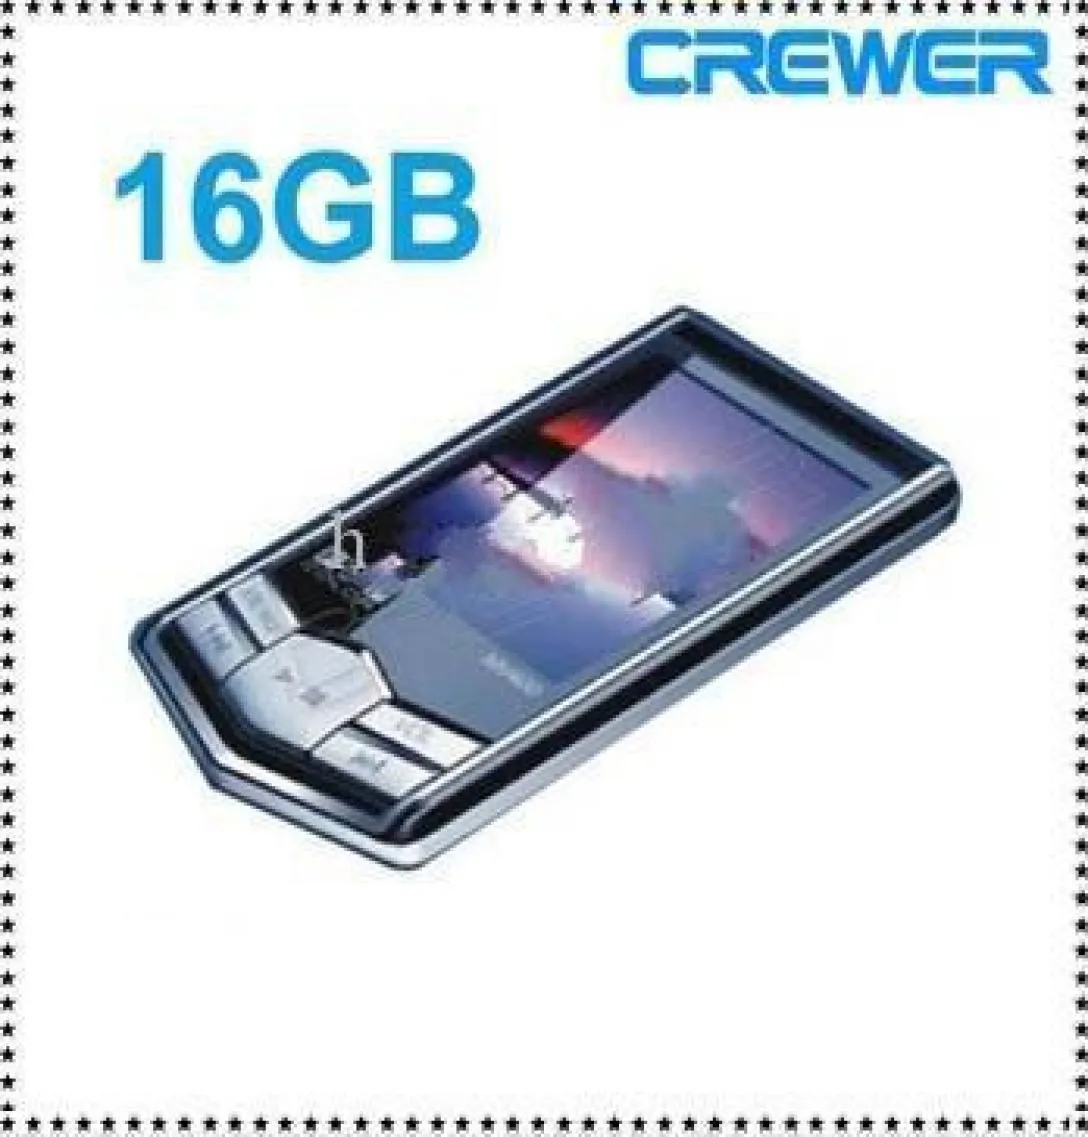 Whole MP4 Player MP3 Players New 8GB 16GB Slim LCD Screen PMP Video Media Fm Radio Player ship2558310